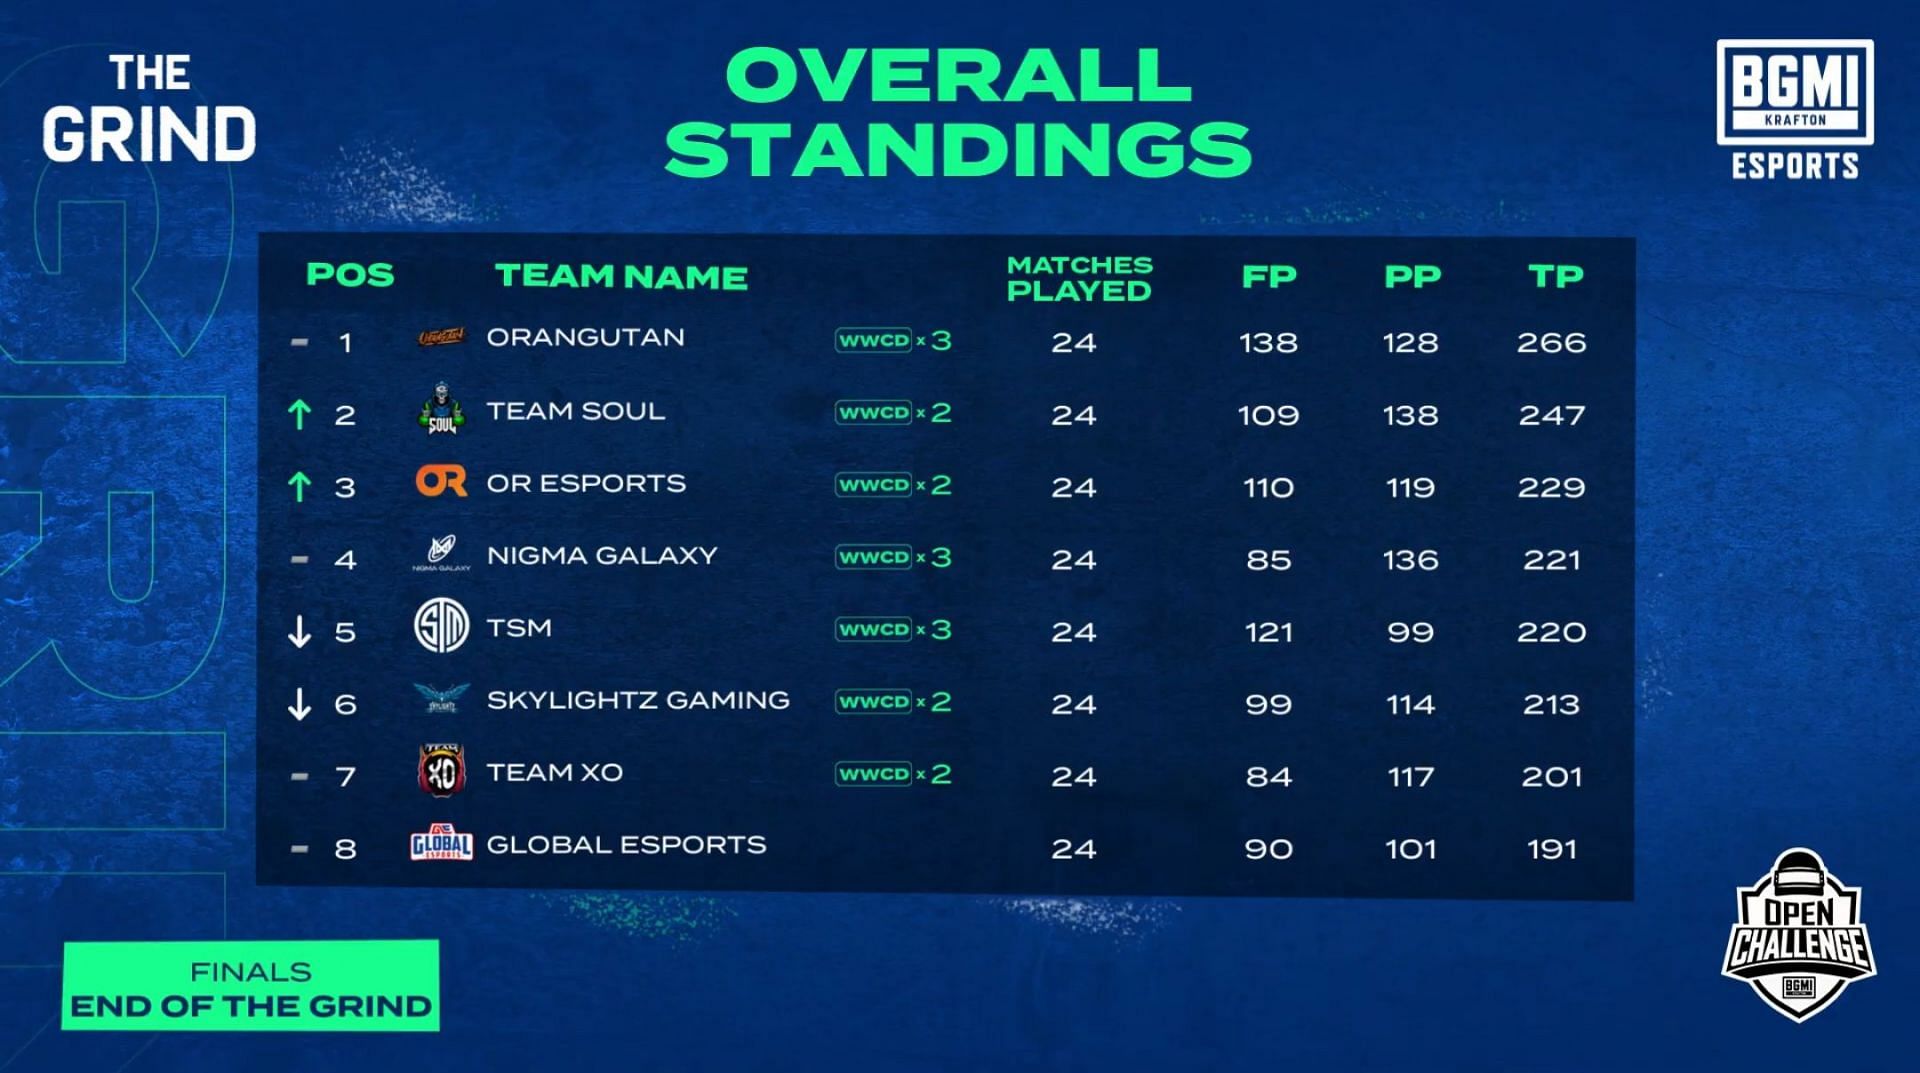 Top 8 teams standings after BMOC The Grind Finals (Image via BMOC The Grind)